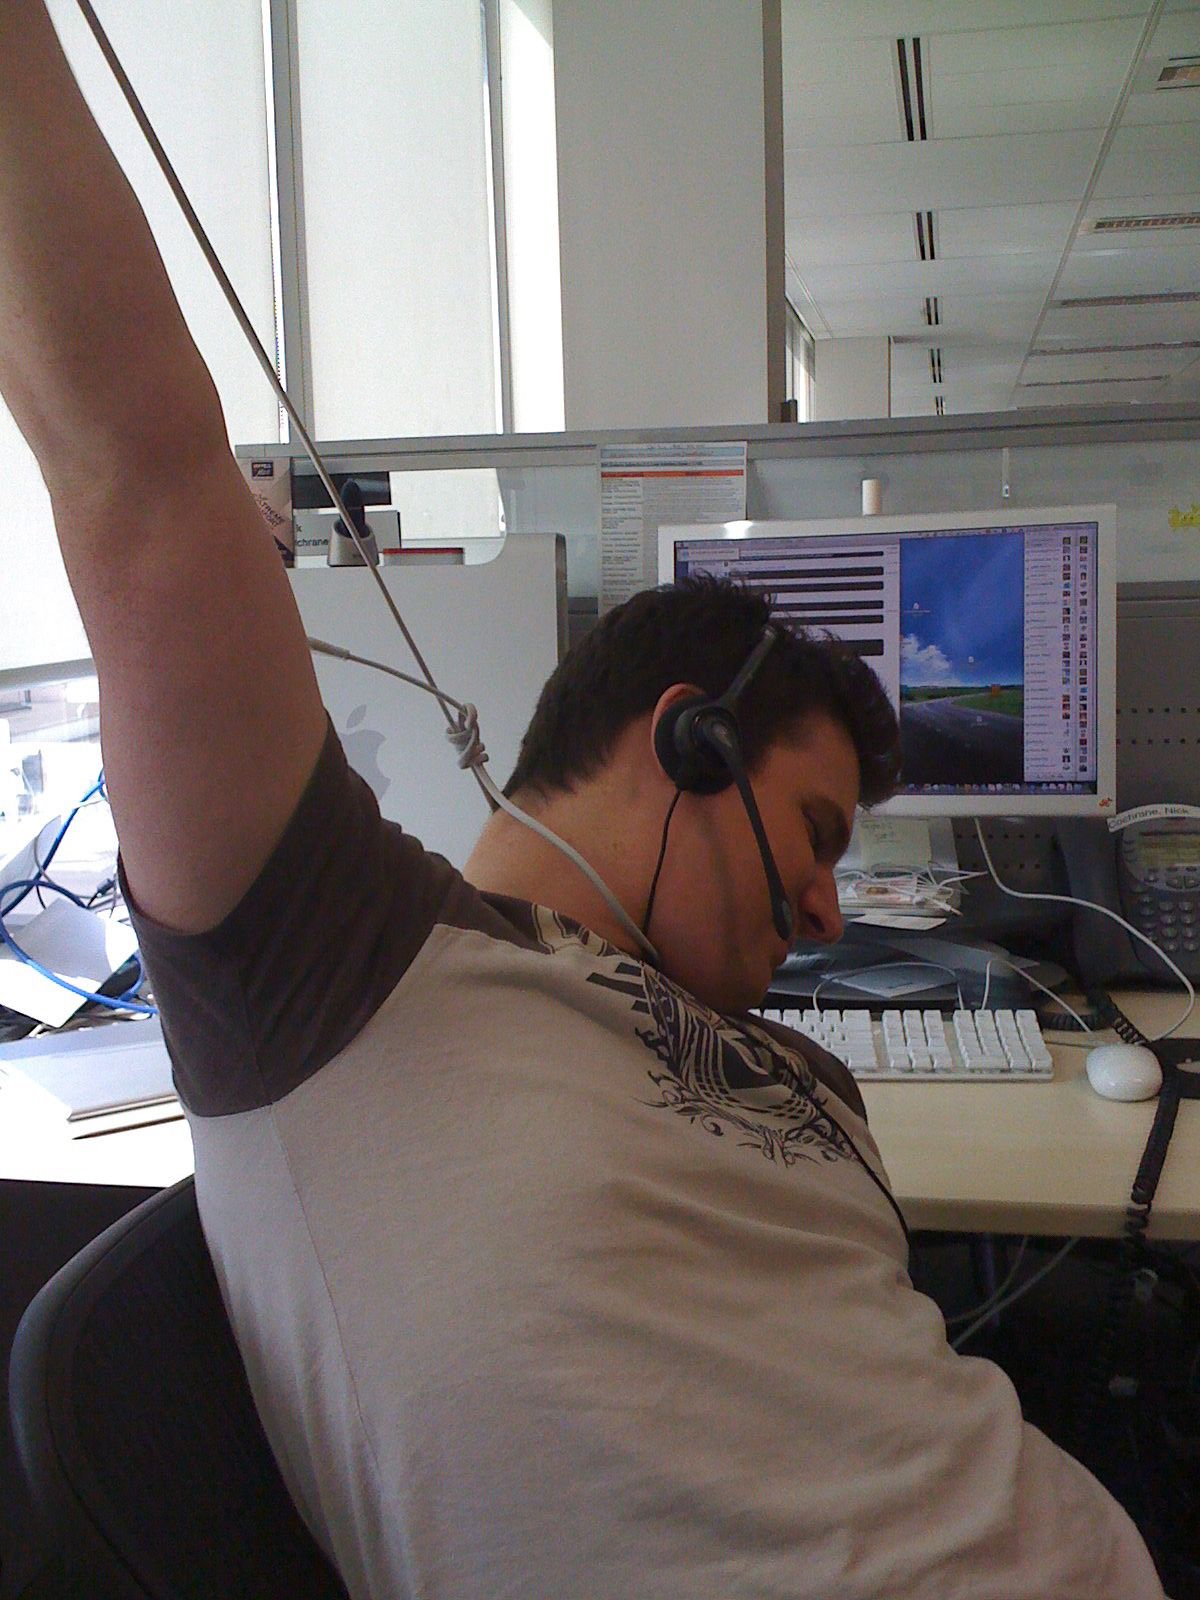 A photo of a white man sitting at his desk with a call centre headset on, his head slumped to the side and a "noose" made out of ethernet cable around his neck, holding the other end of the noose up with one hand.